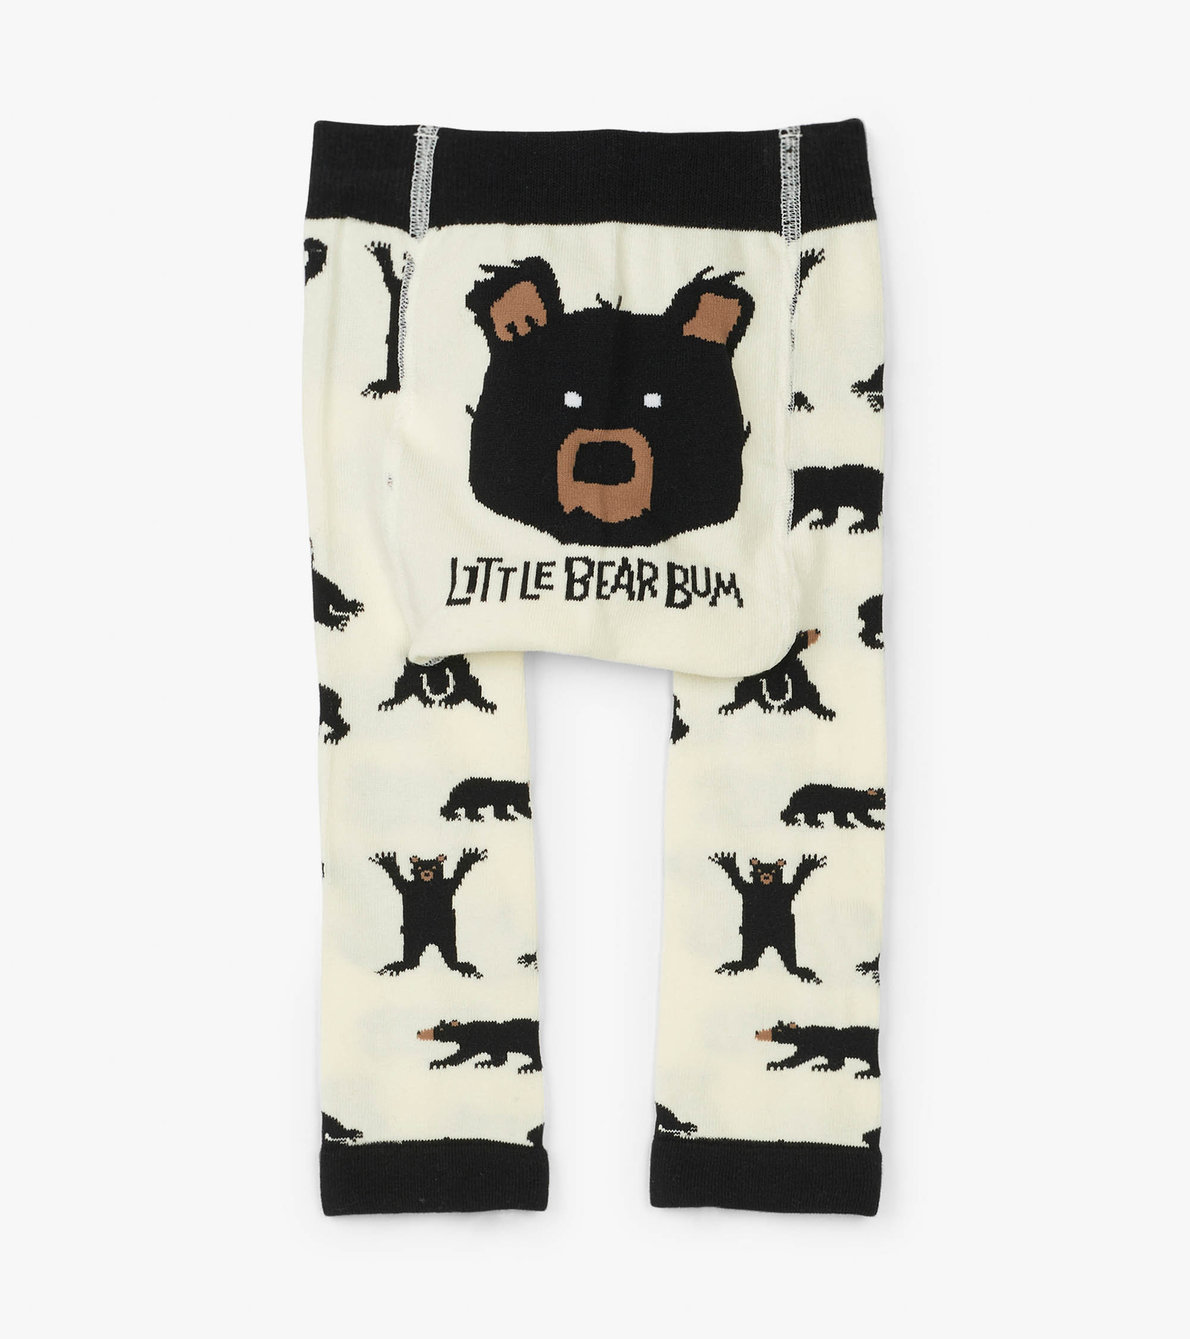 View larger image of Bear Bum Baby Tights